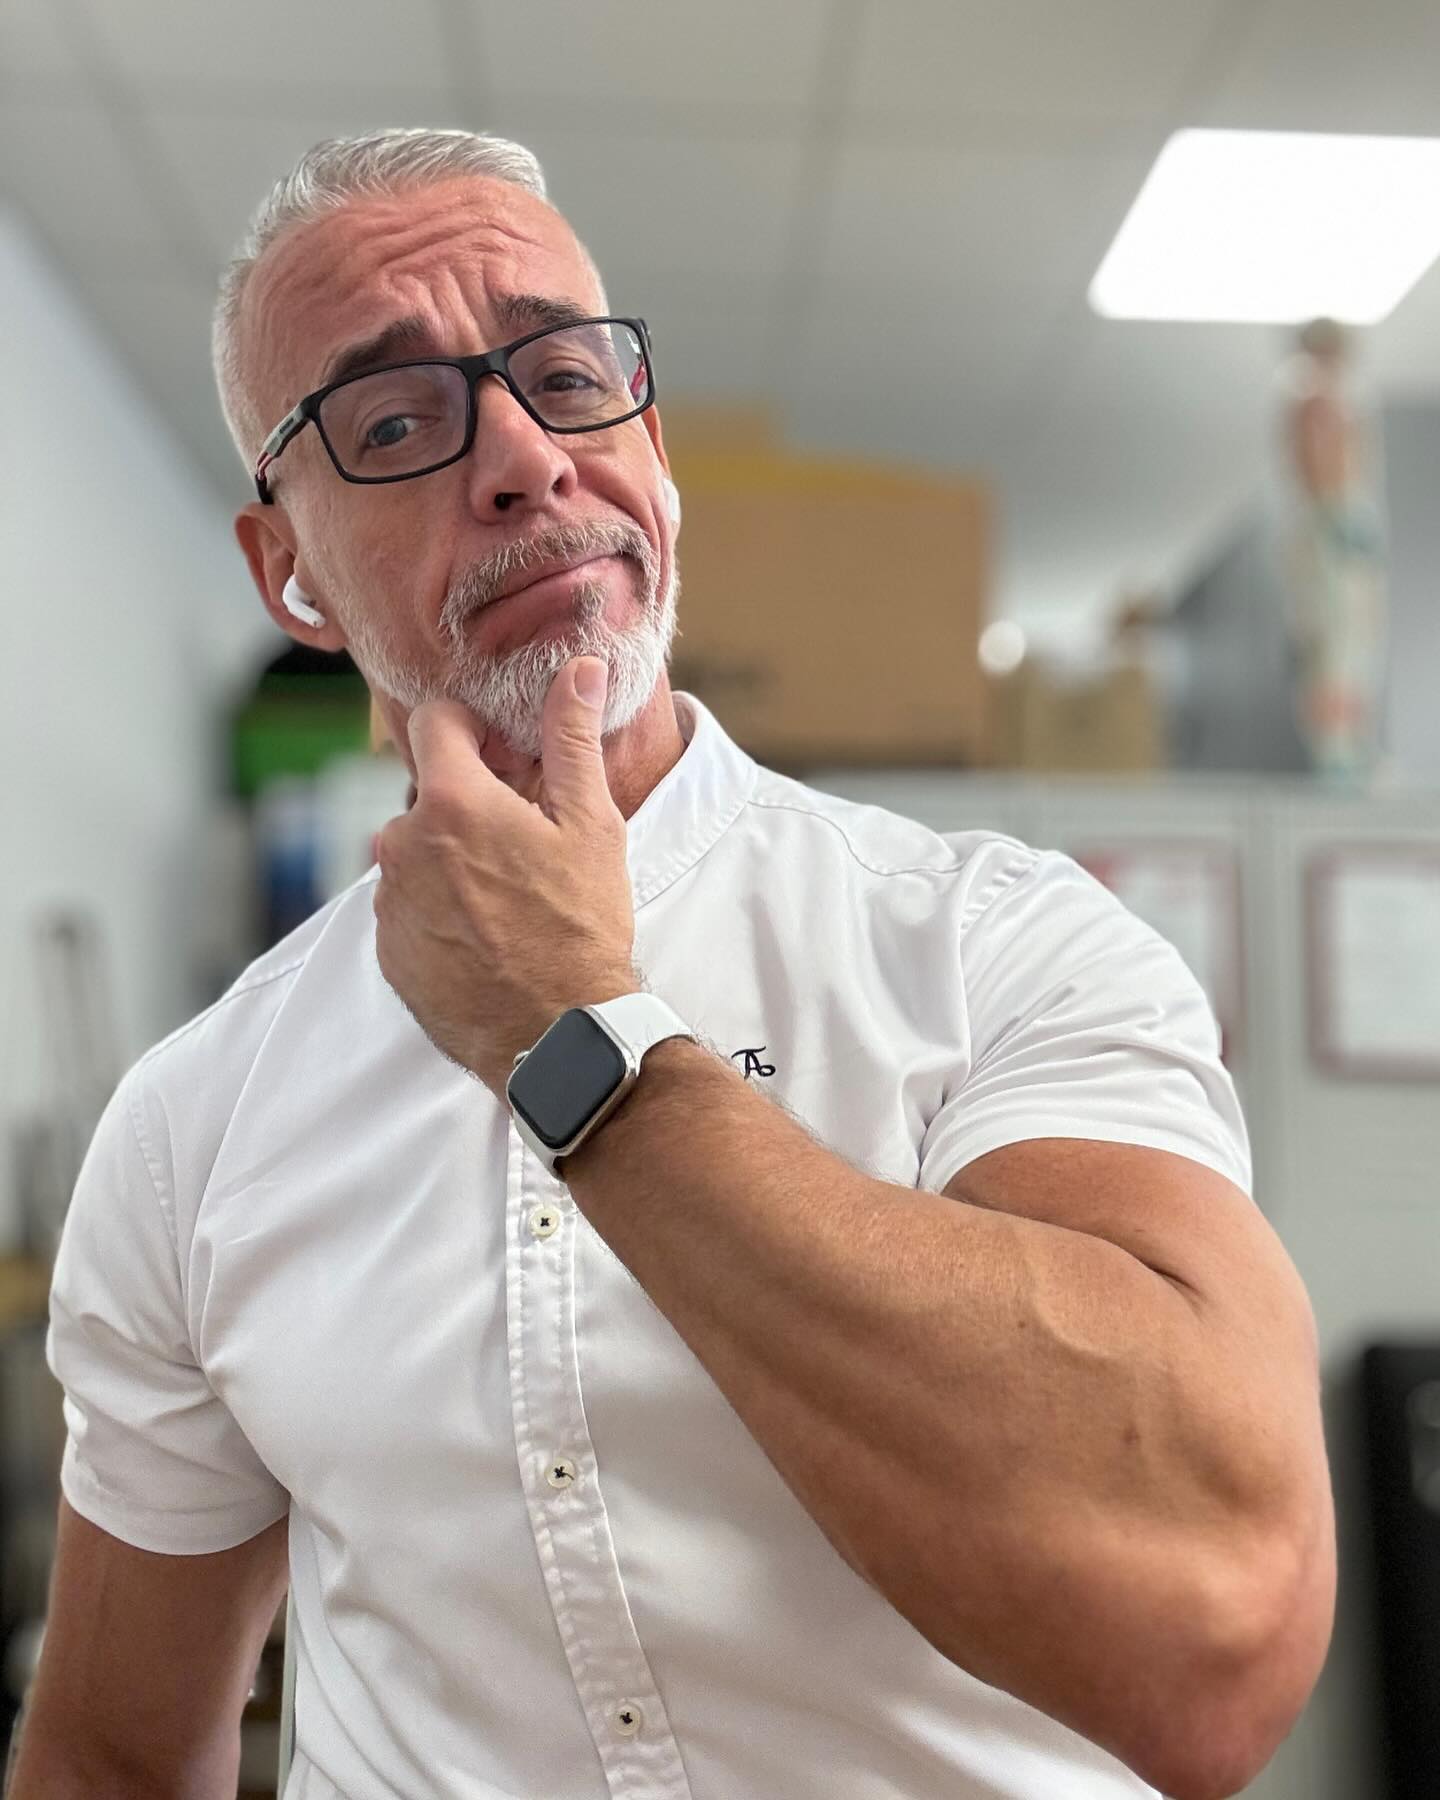 Can’t build muscle as a vegan? Let’s talk. 

#daddy #silverfox #vegan #fitover55 #gay #gayfit #veganfit #workoutmotivation